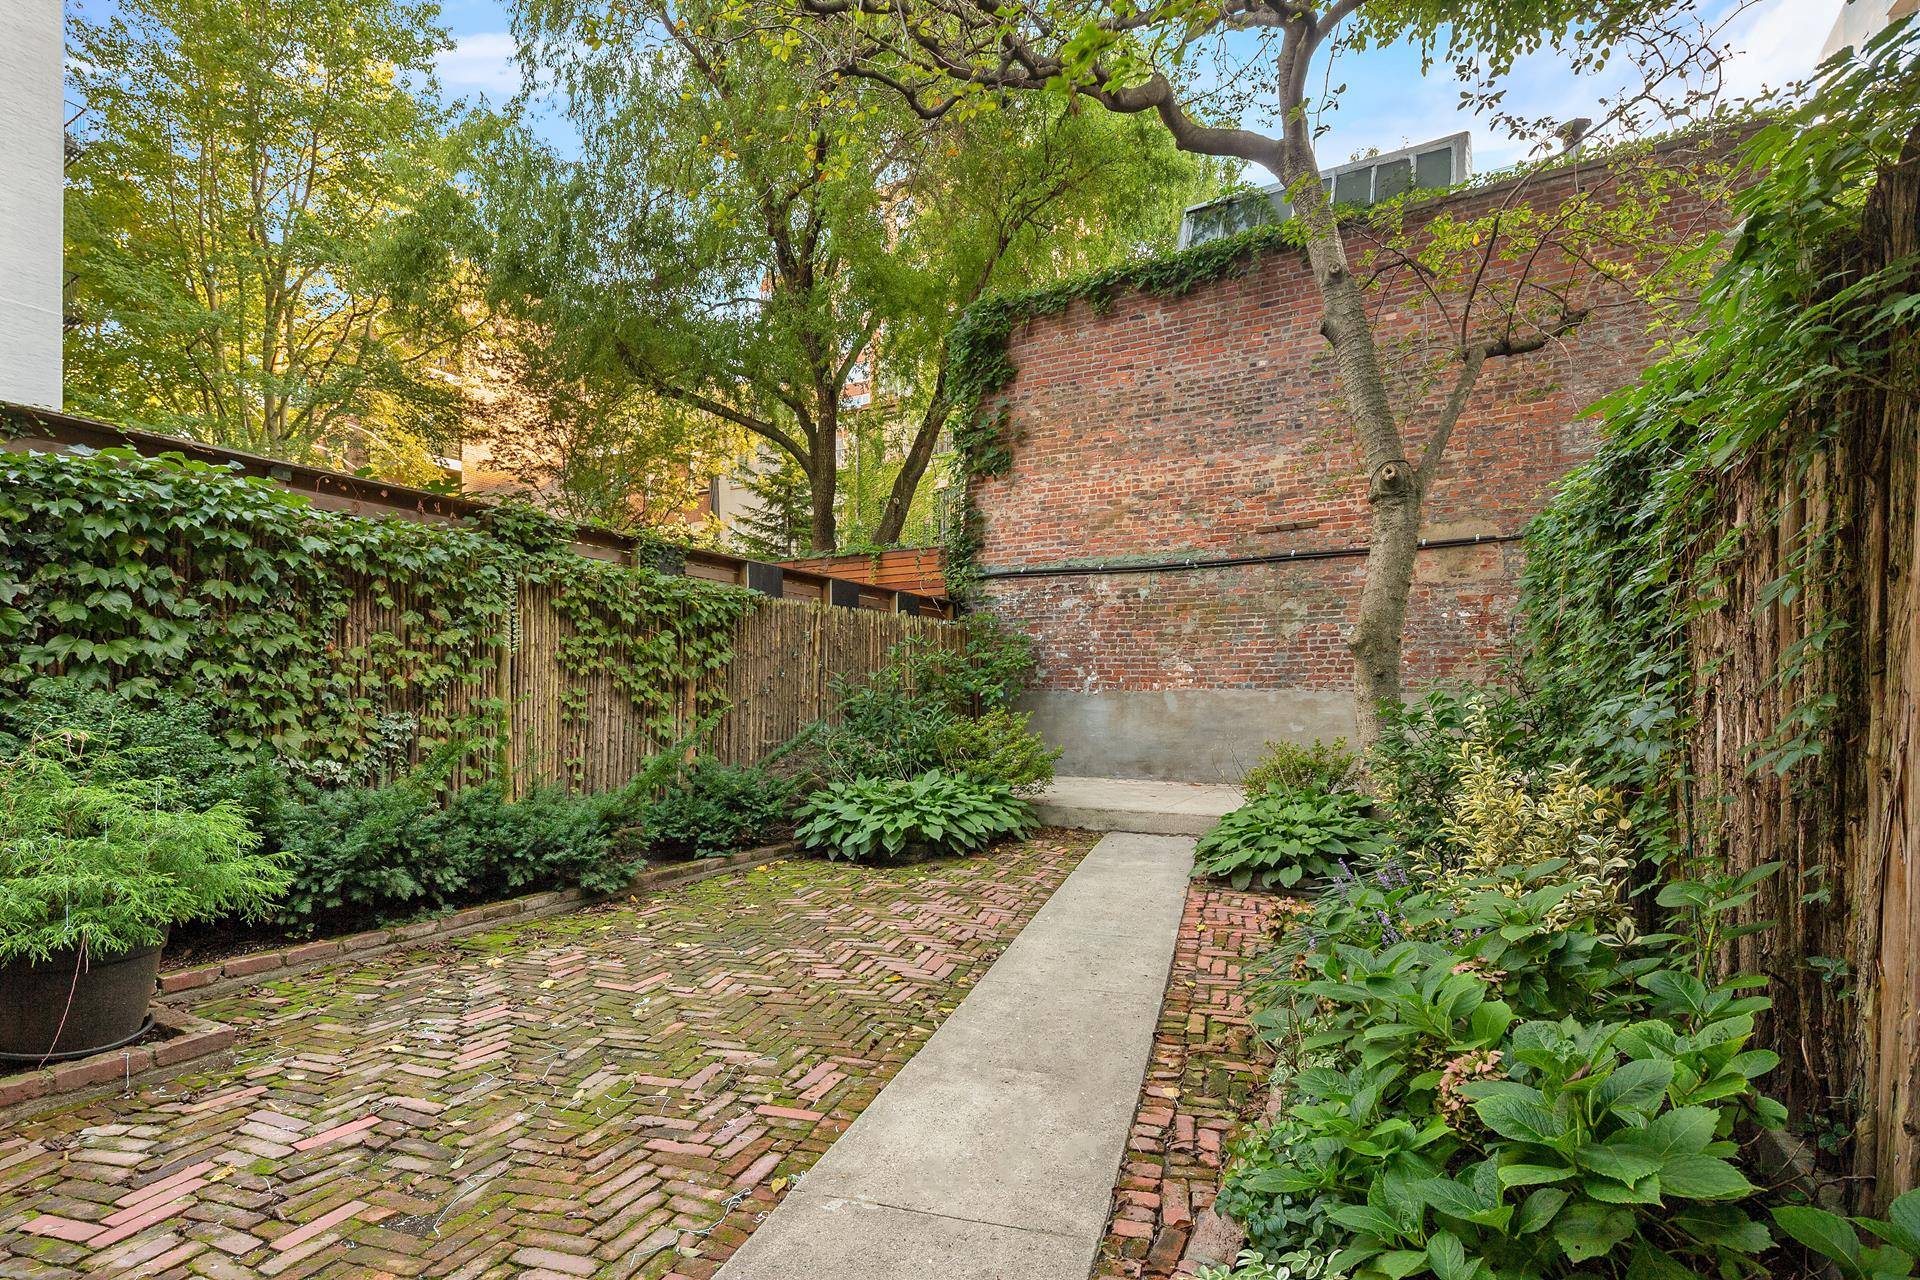 Located in the tranquility of the South Village's Charlton King Vandam Historic District, this charming 2400 Sq ft Garden duplex apartment is one of only 2 units in this private ...